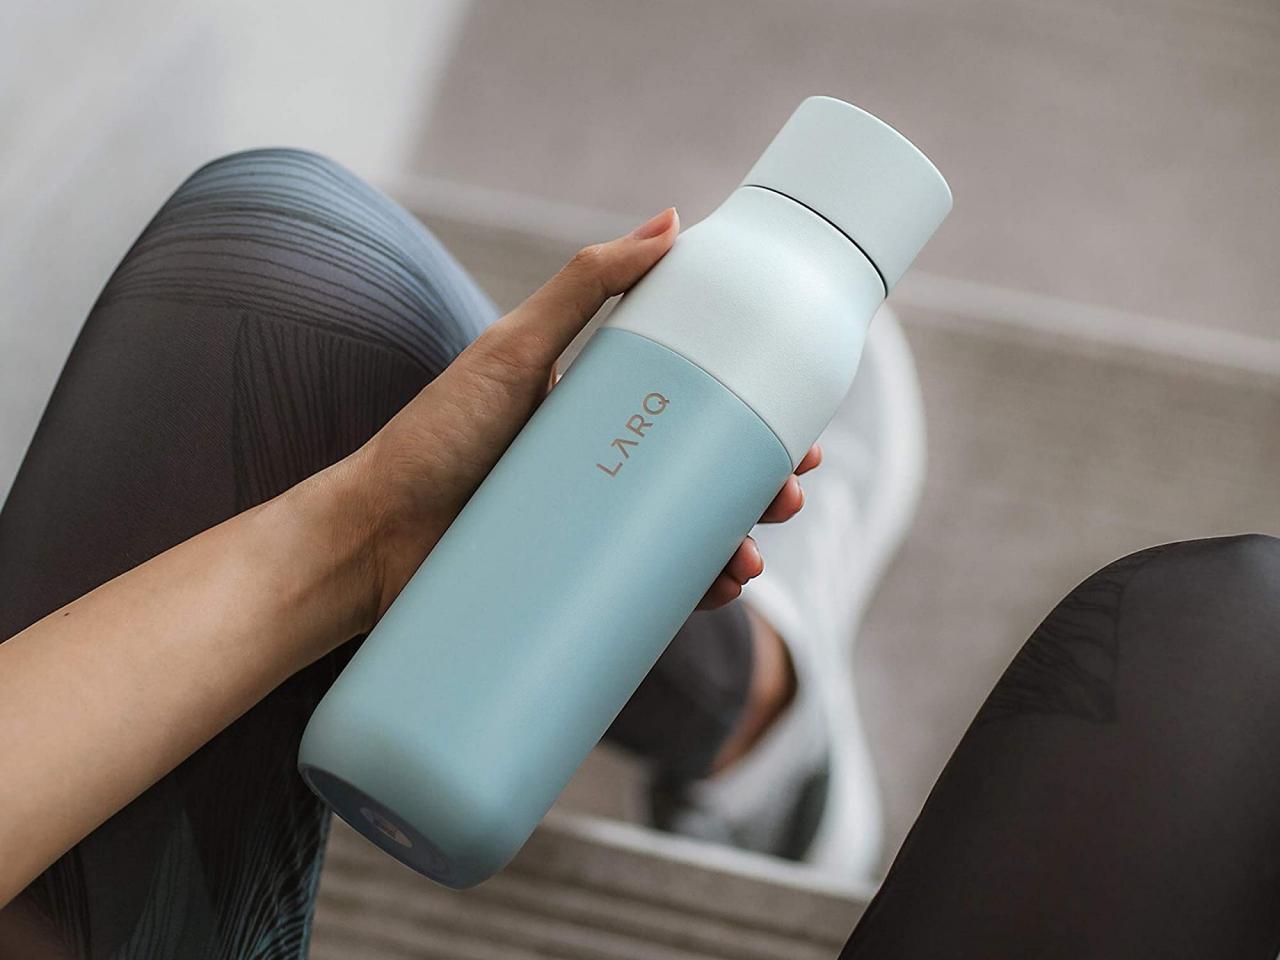 This Genius Water Bottle Enables Easy Hand Washing On The Go